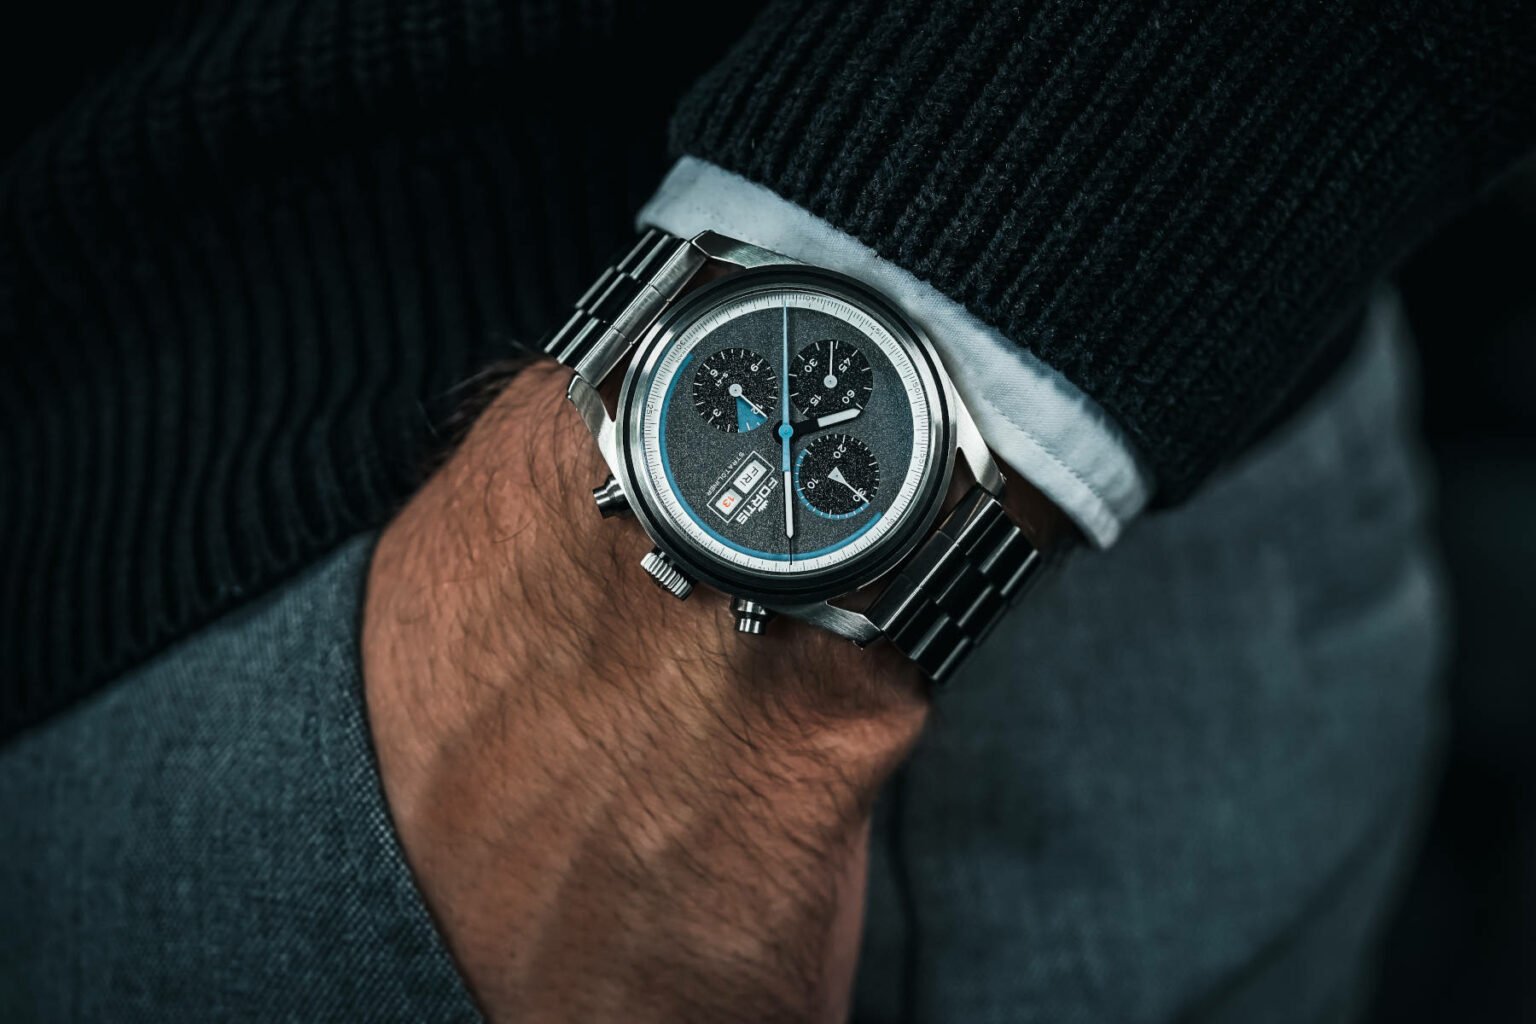 【F】 The New Fortis Stratoliner: The First Watch Pre-Tested in Space?